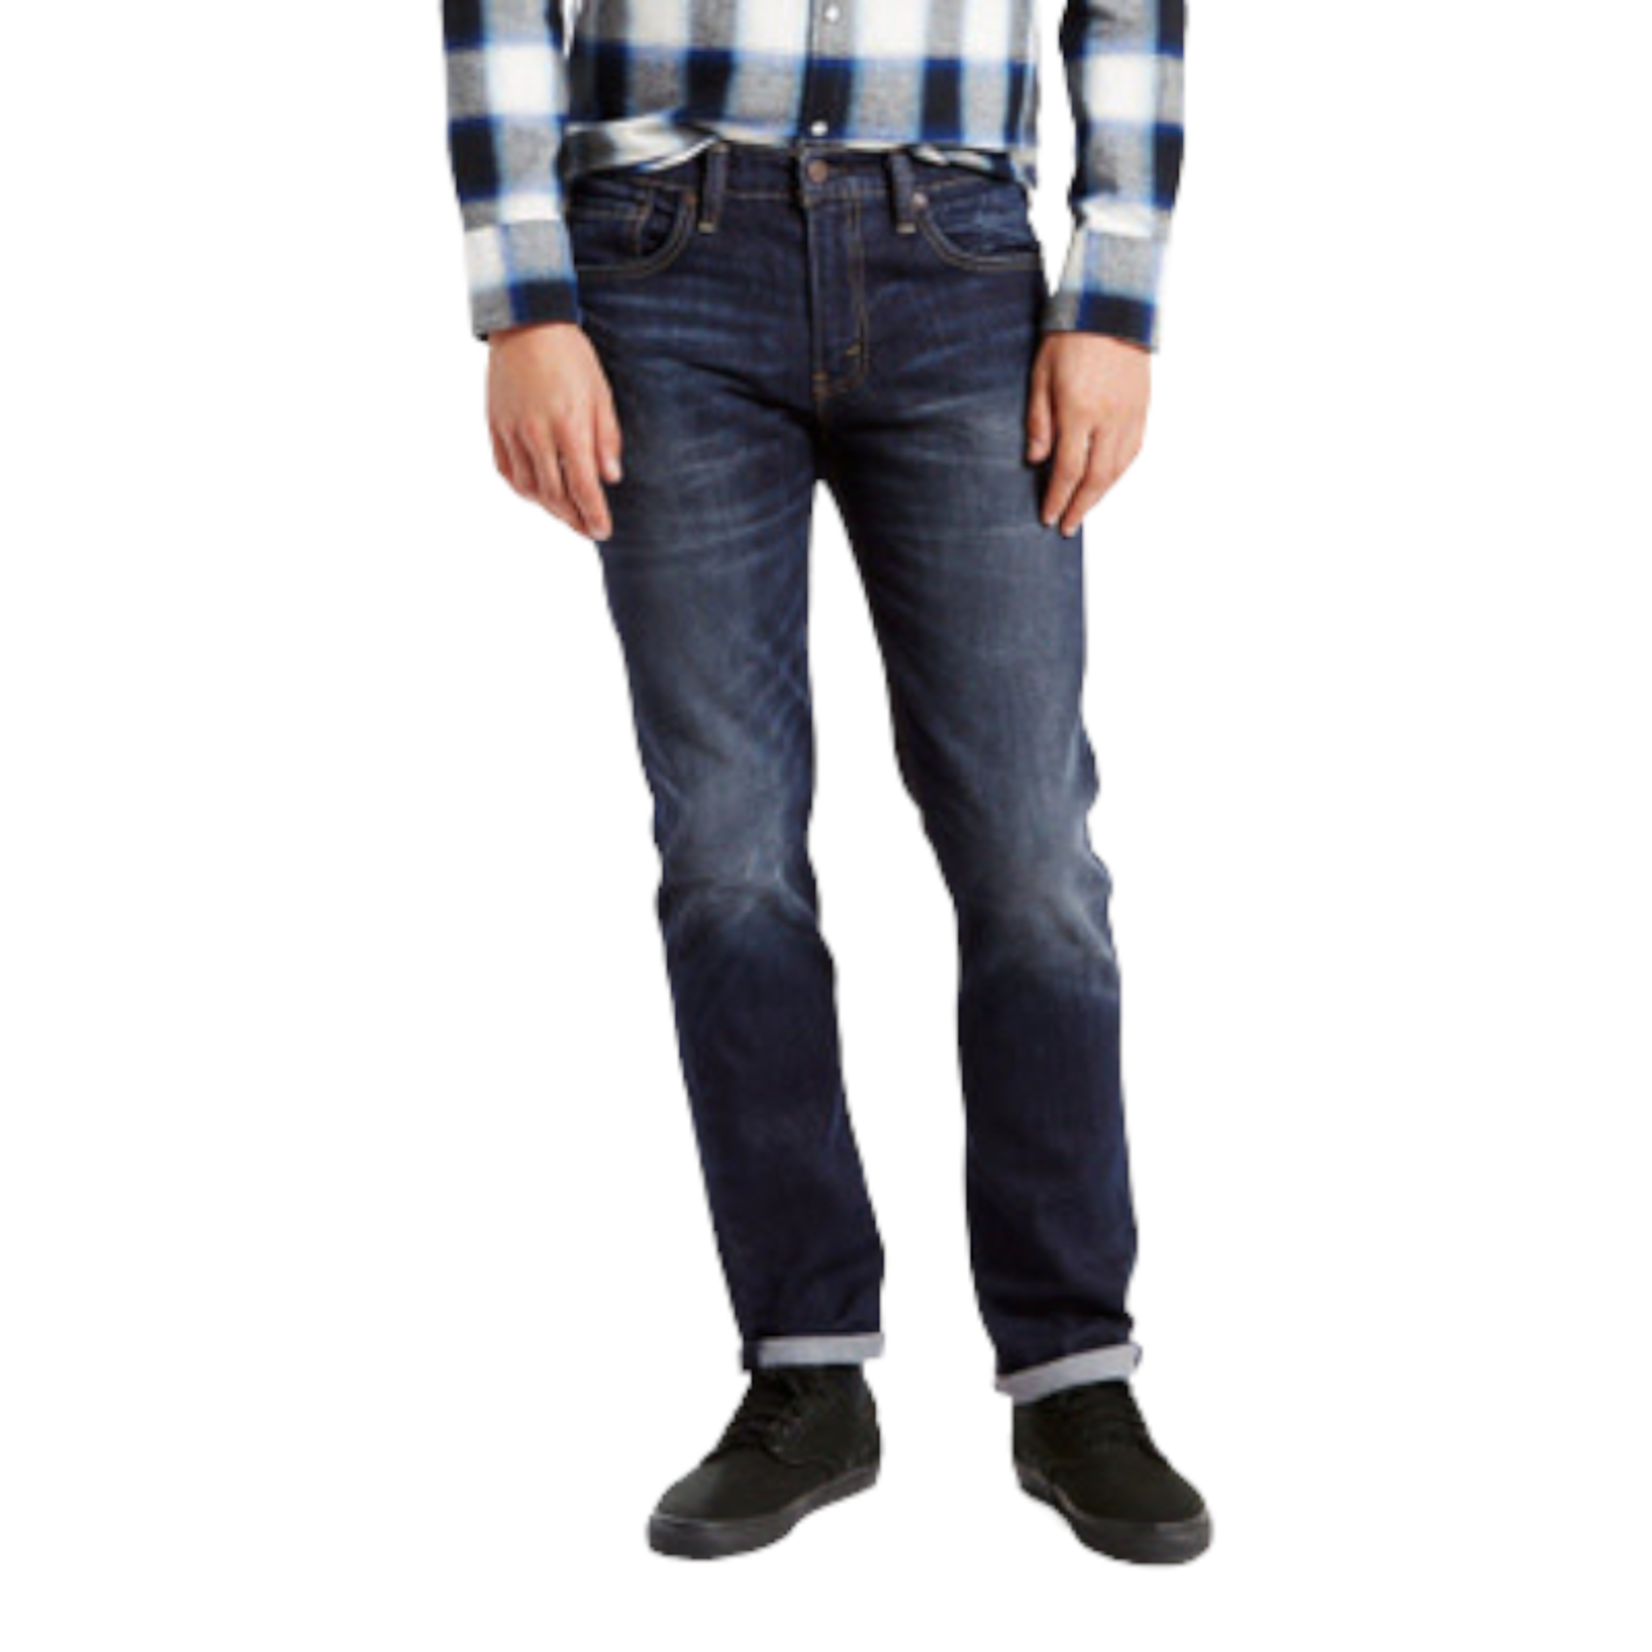 LEVIS 511 SLIM FIT 04511-1390 - Michael's and Jody's